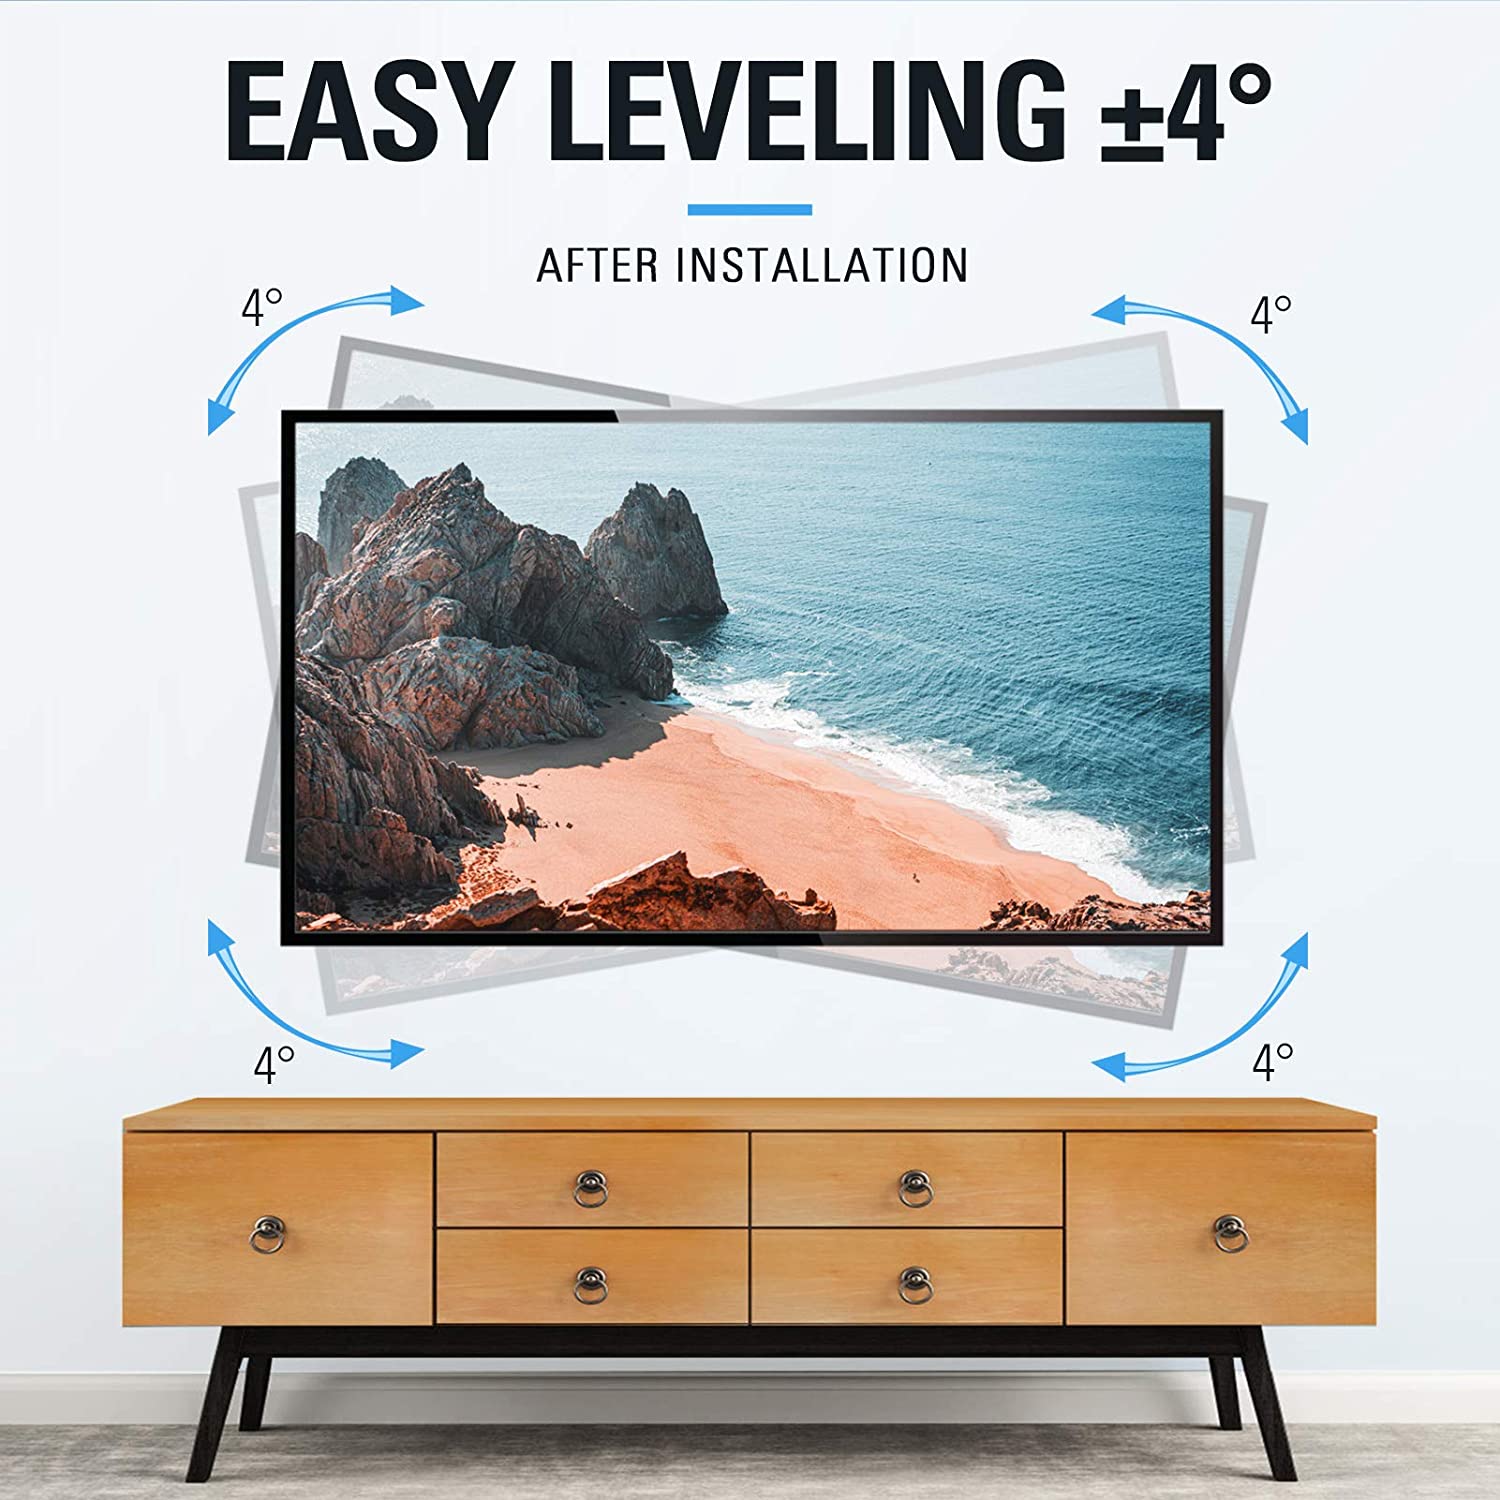 level the TV after installation